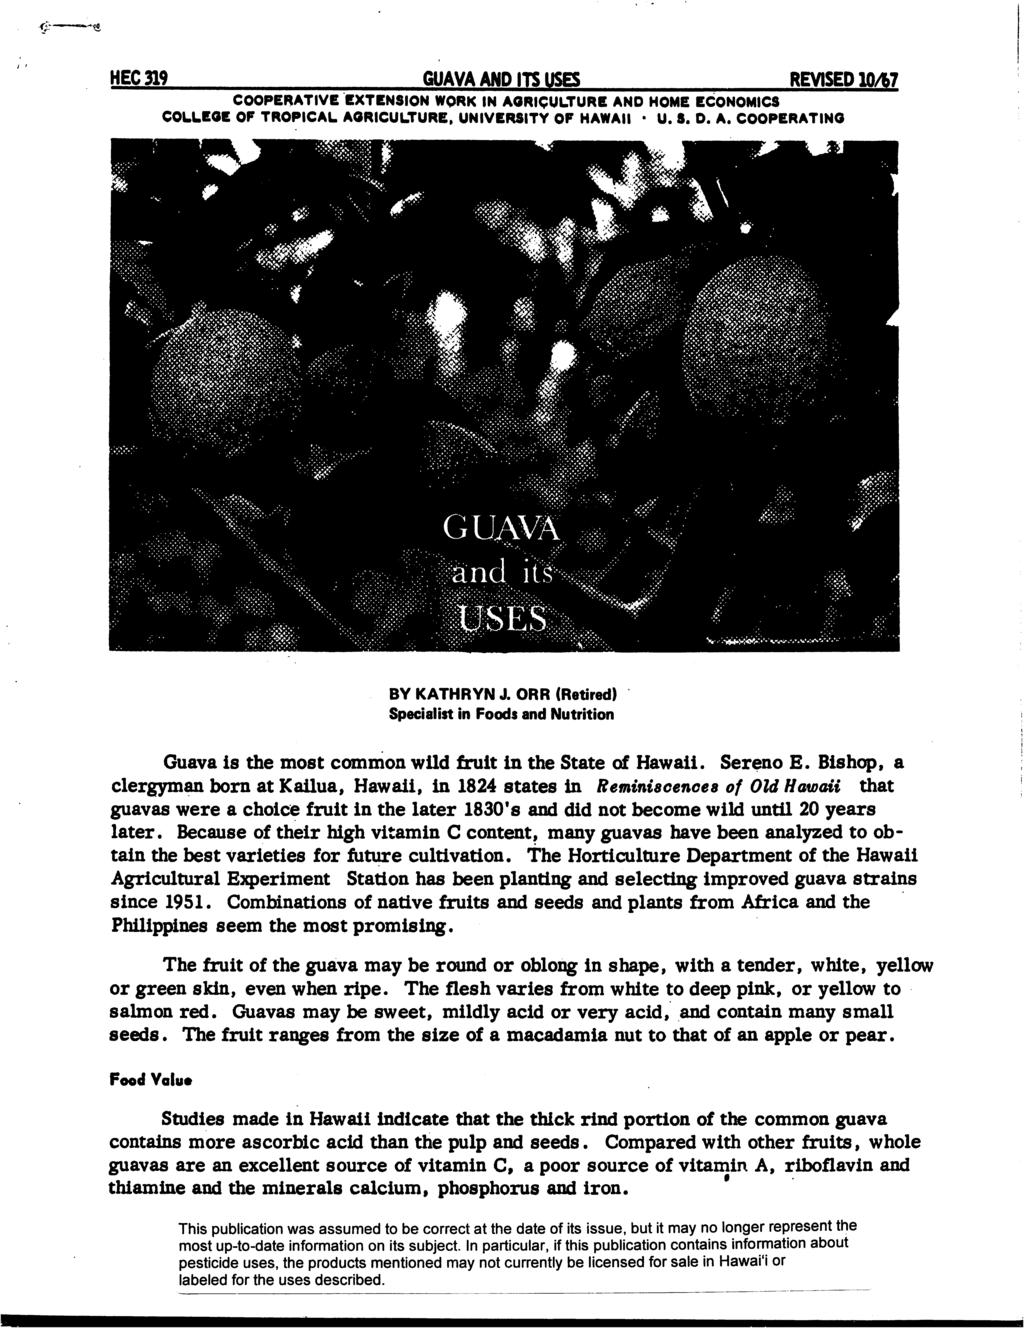 HEC319 GUAVA AND ITS USES REVISED 10/B7 COOPERATIVE EXTENSION WORK IN AGRICULTURE AND HOME ECONOMICS COLLEGE OP TROPICAL AGRICULTURE, UNIVERSITY OF HAWAII U. S. D. A. COOPERATING BY KATHRYN J.